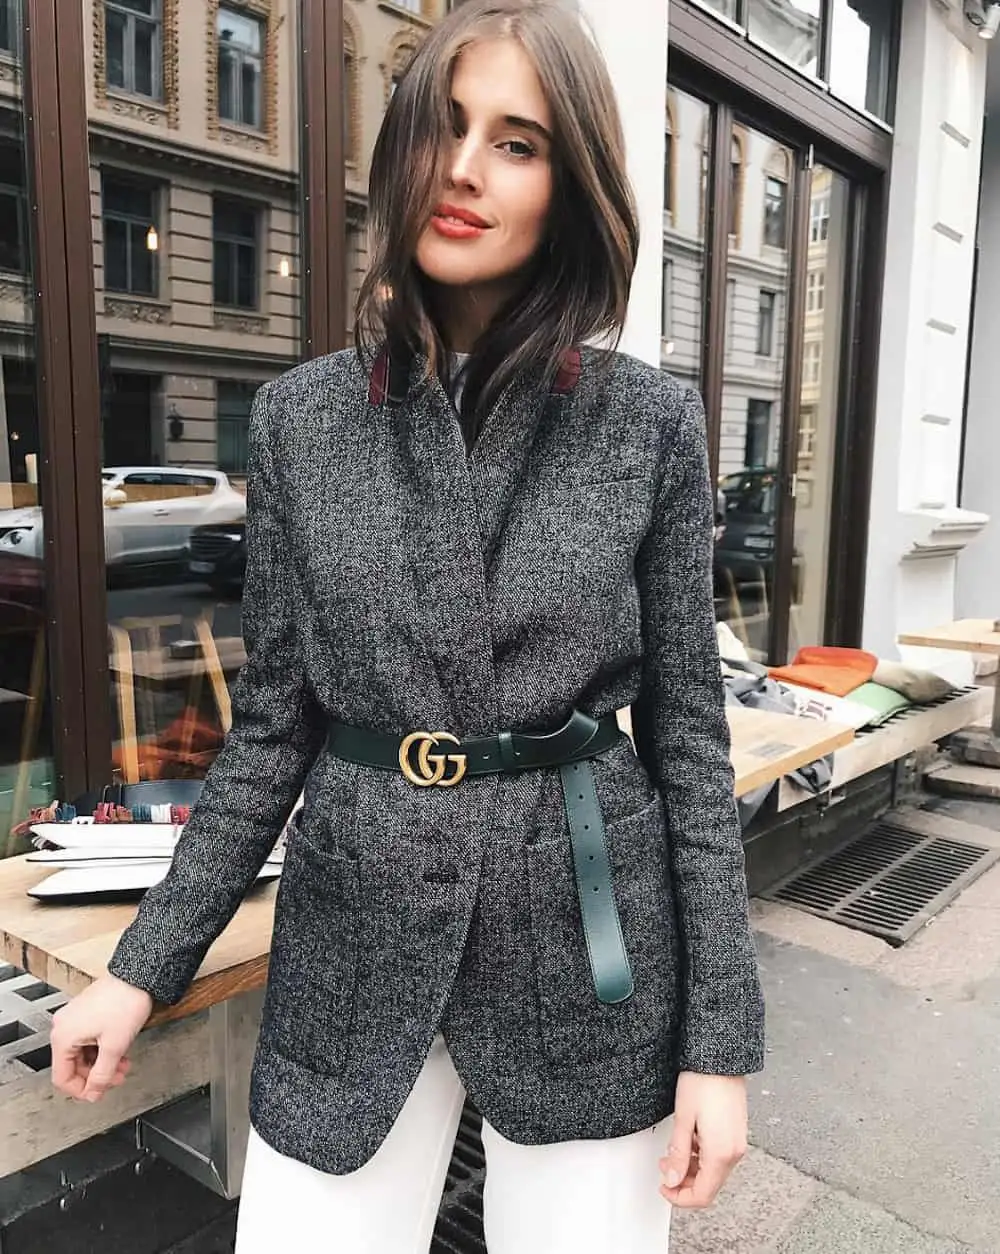 Gucci Belt Outfits for a Glamorous Statement: My Favorite Looks